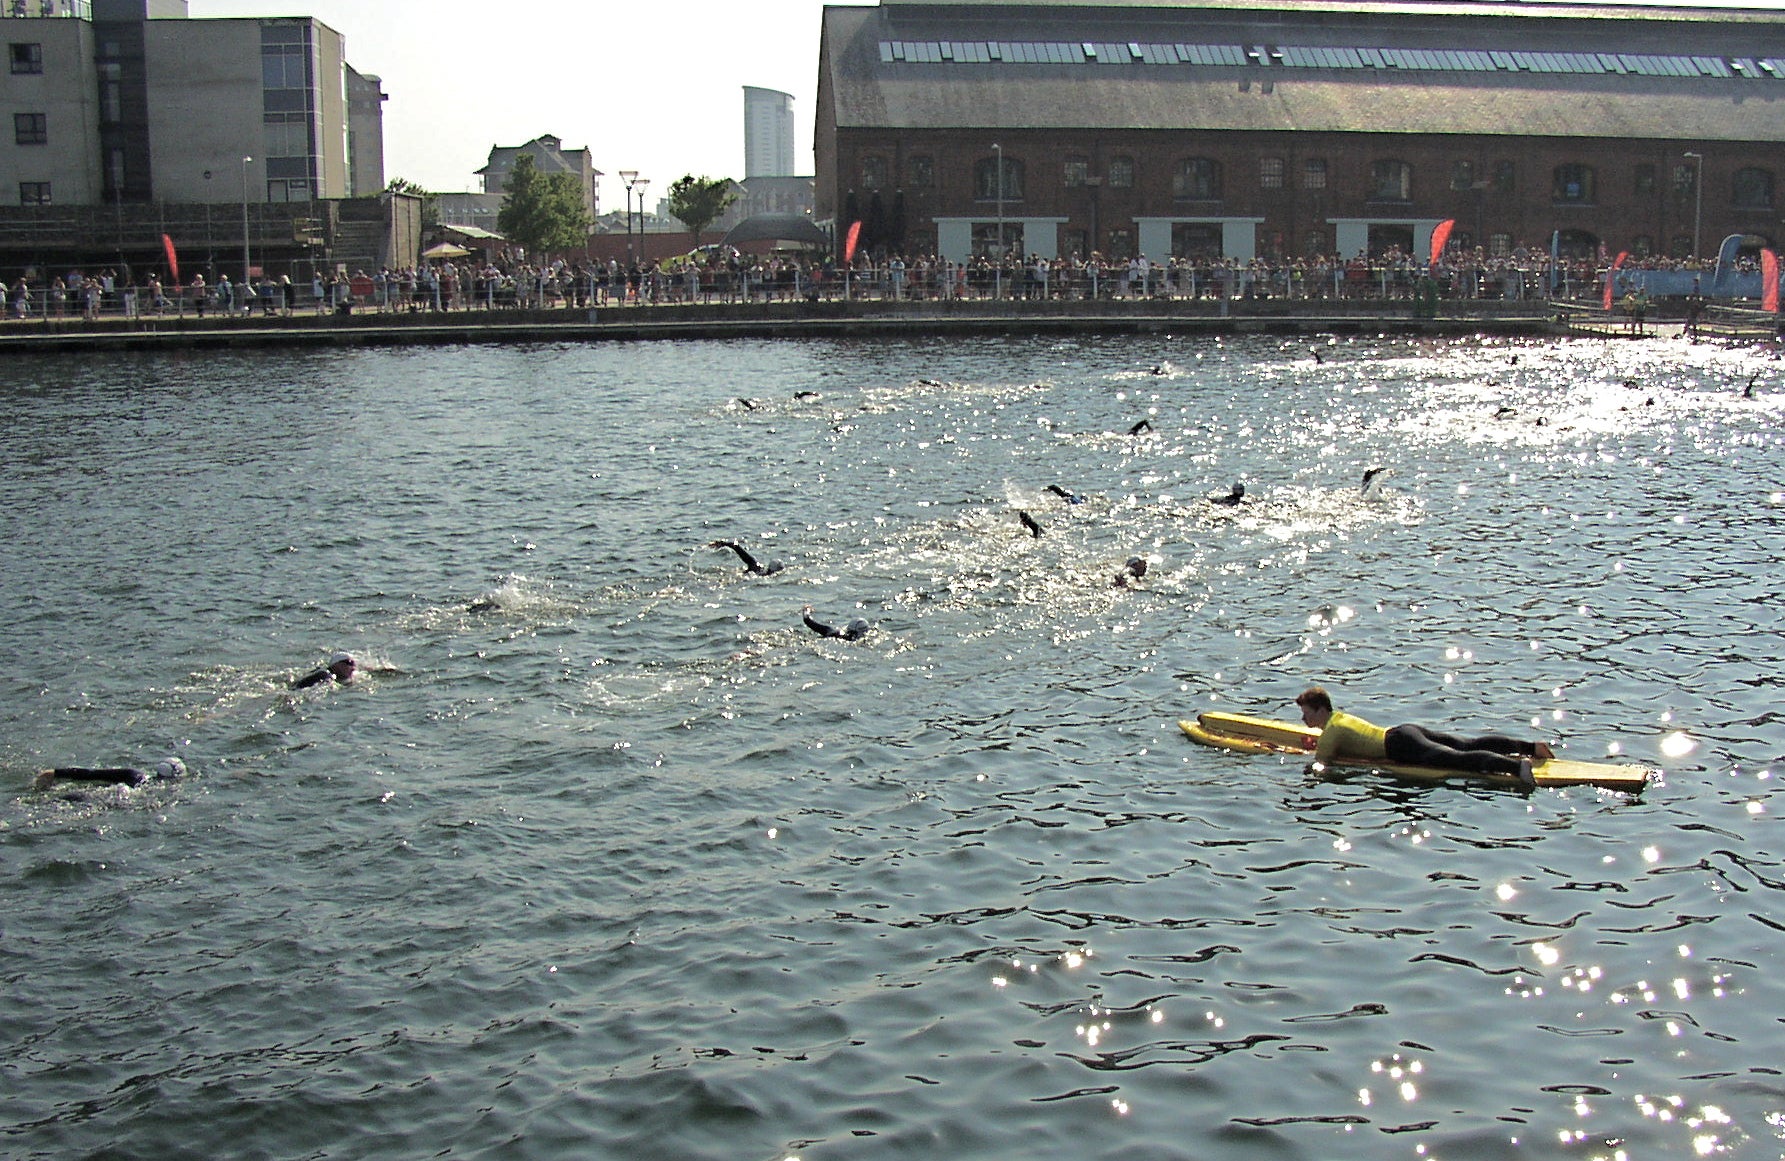 The tragedy unfolded at the Swansea Triathlon (file photo)